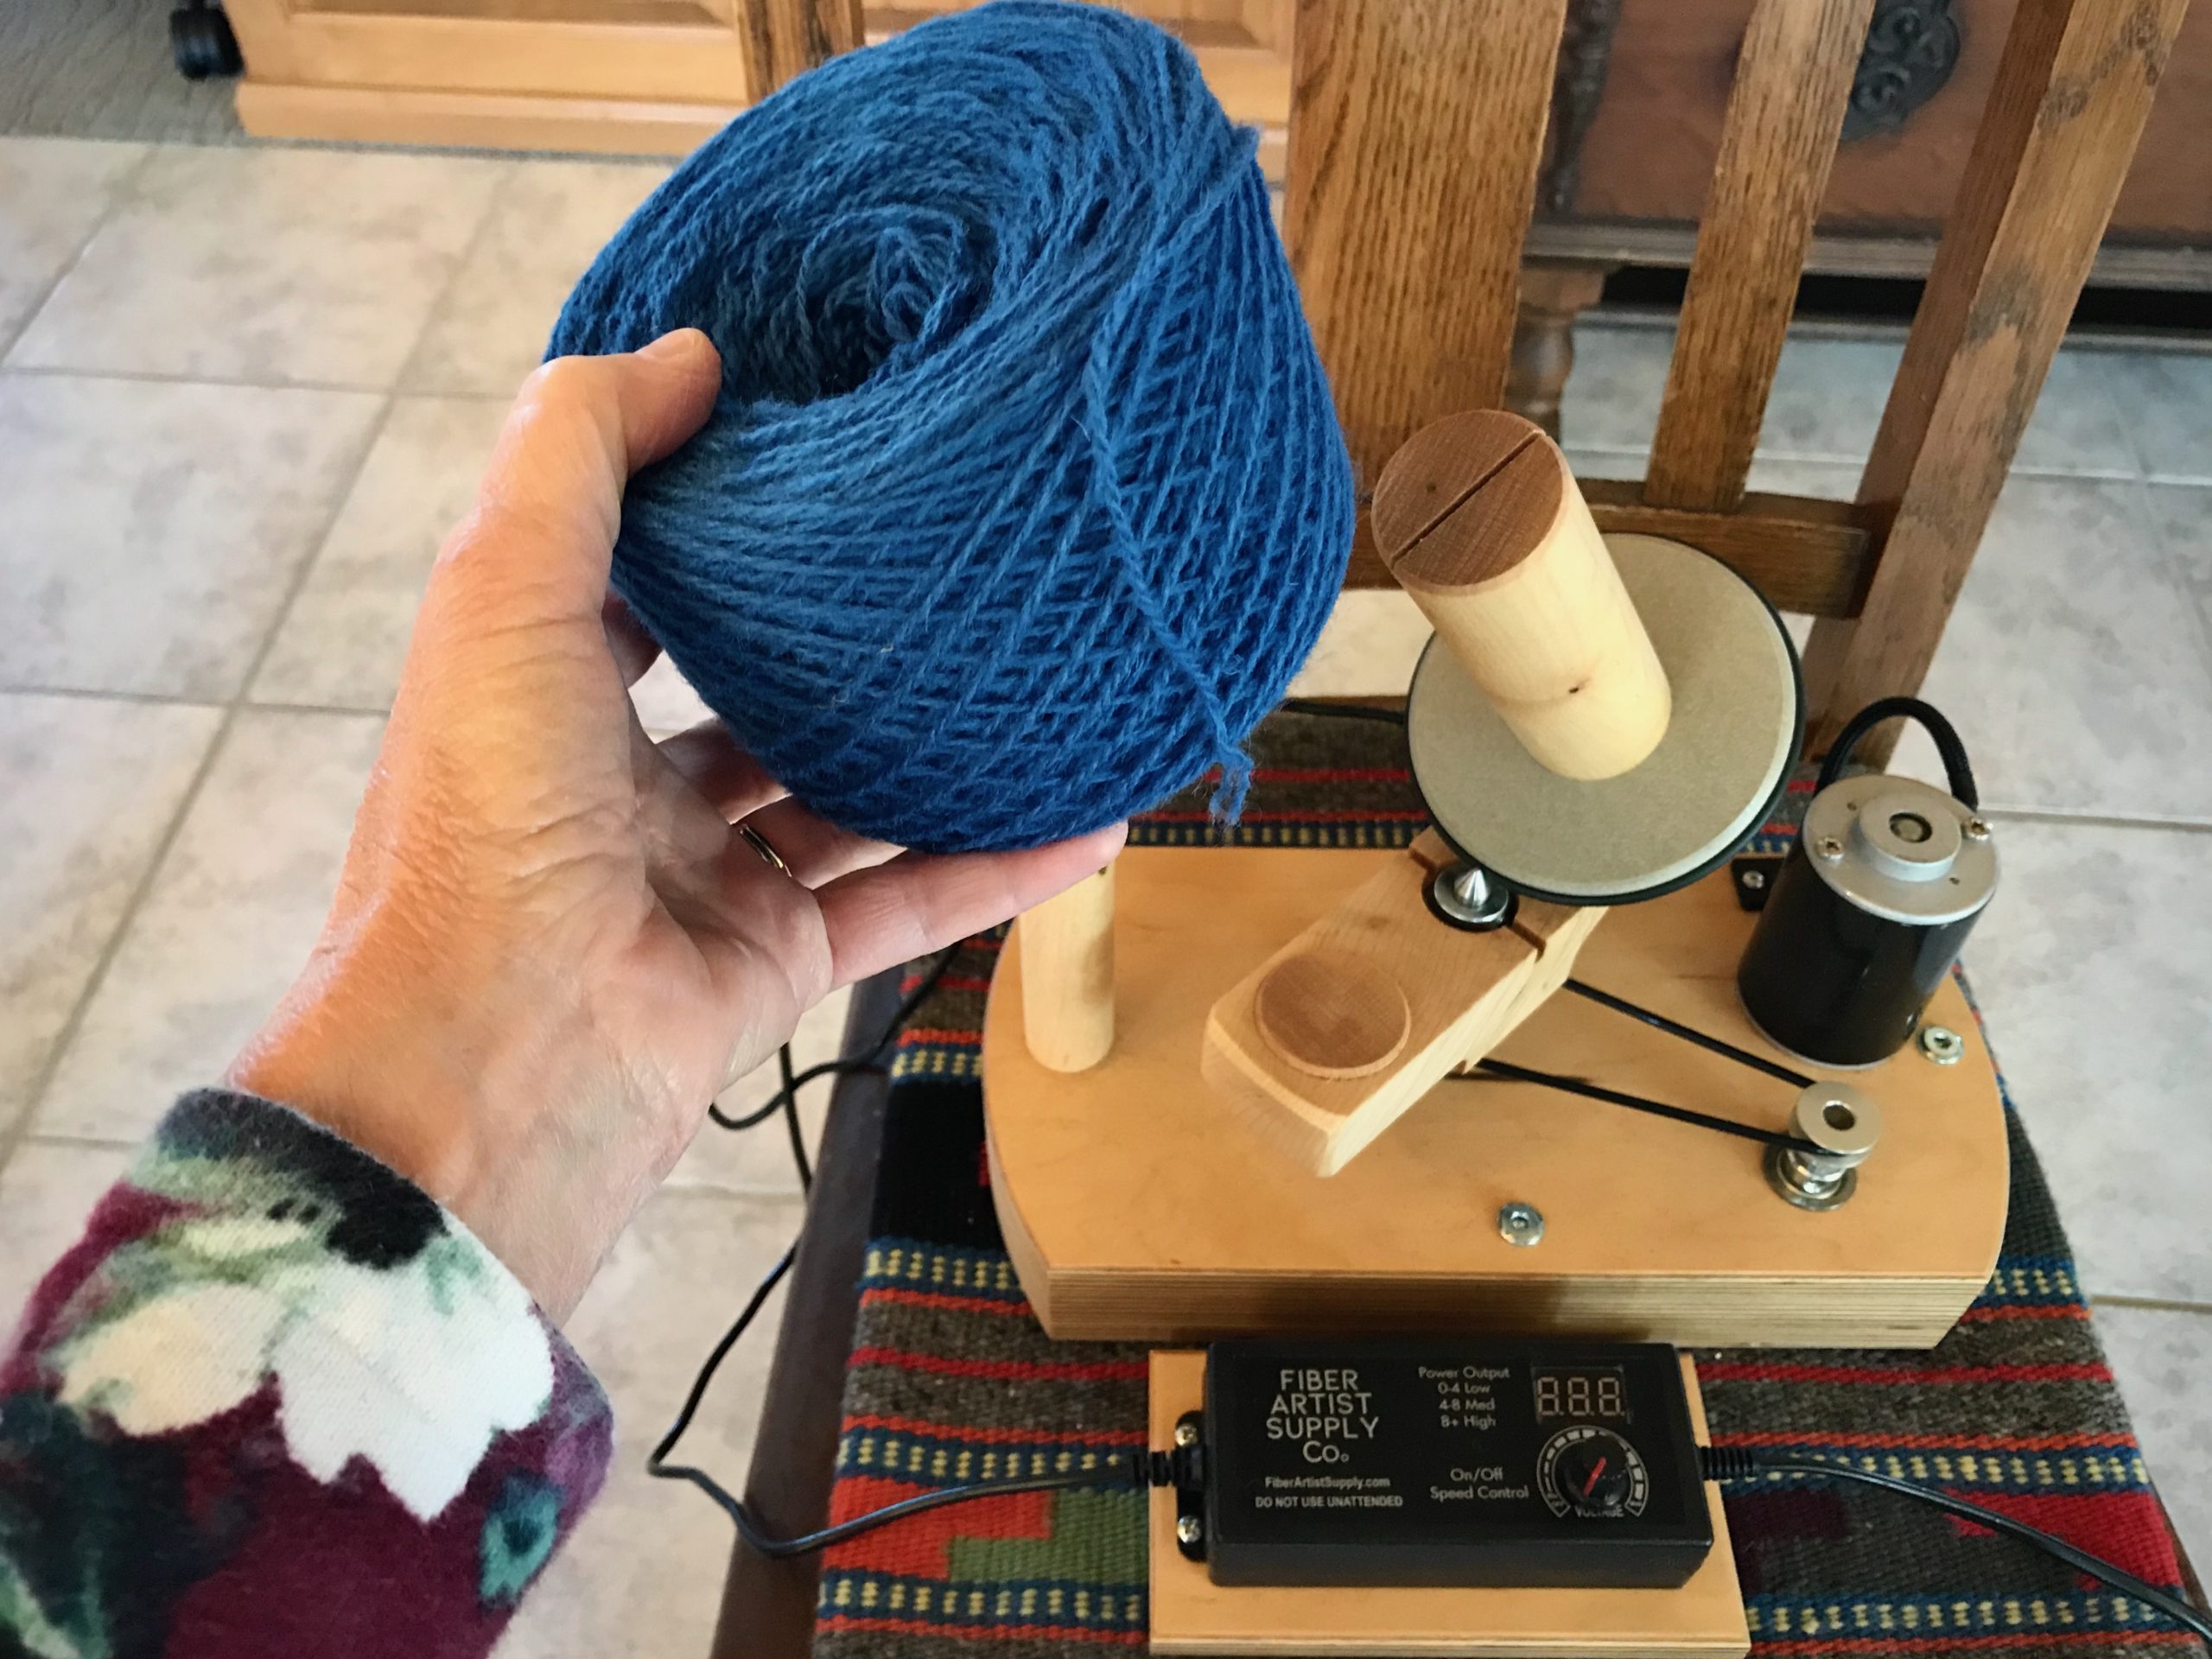 New ball of yarn from the electric ball winder.